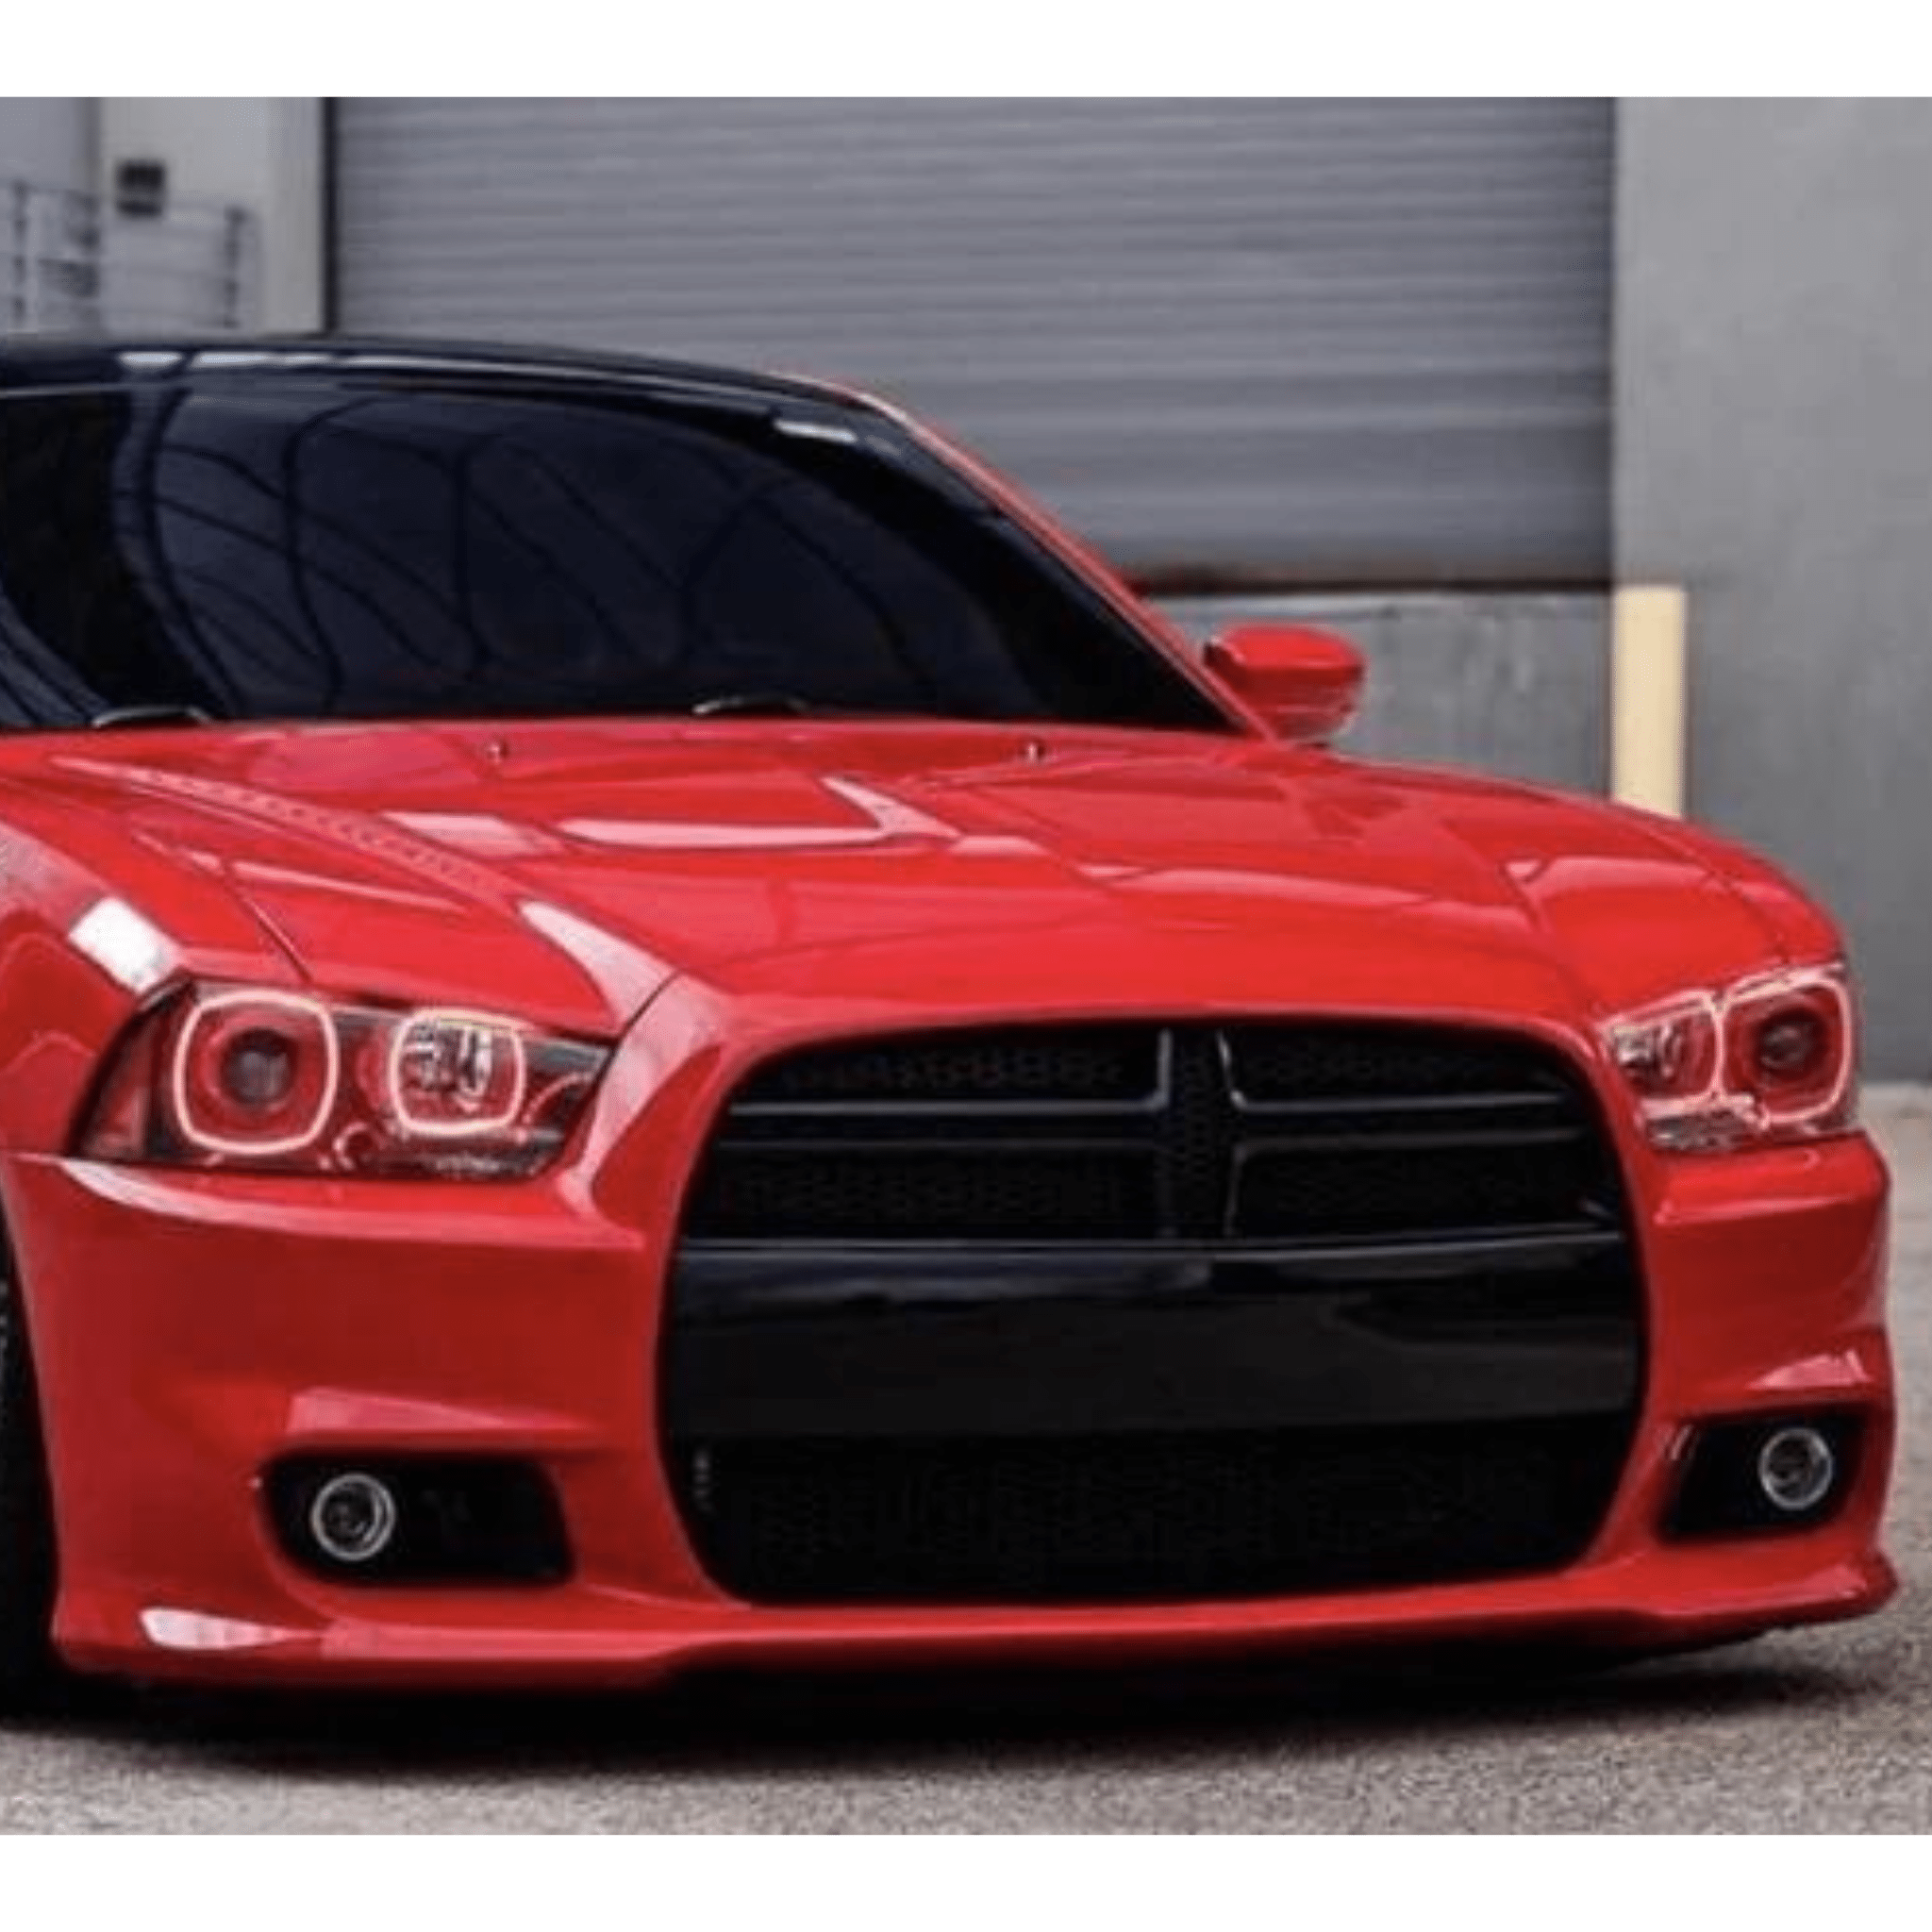 2011-2014 Dodge Charger Multicolor Halo Kit - RGB Halo Kits Multicolor Flow Series Color Chasing RGBWA LED headlight kit Oracle Lighting Trendz OneUpLighting Morimoto theretrofitsource AutoLEDTech Diode Dynamics